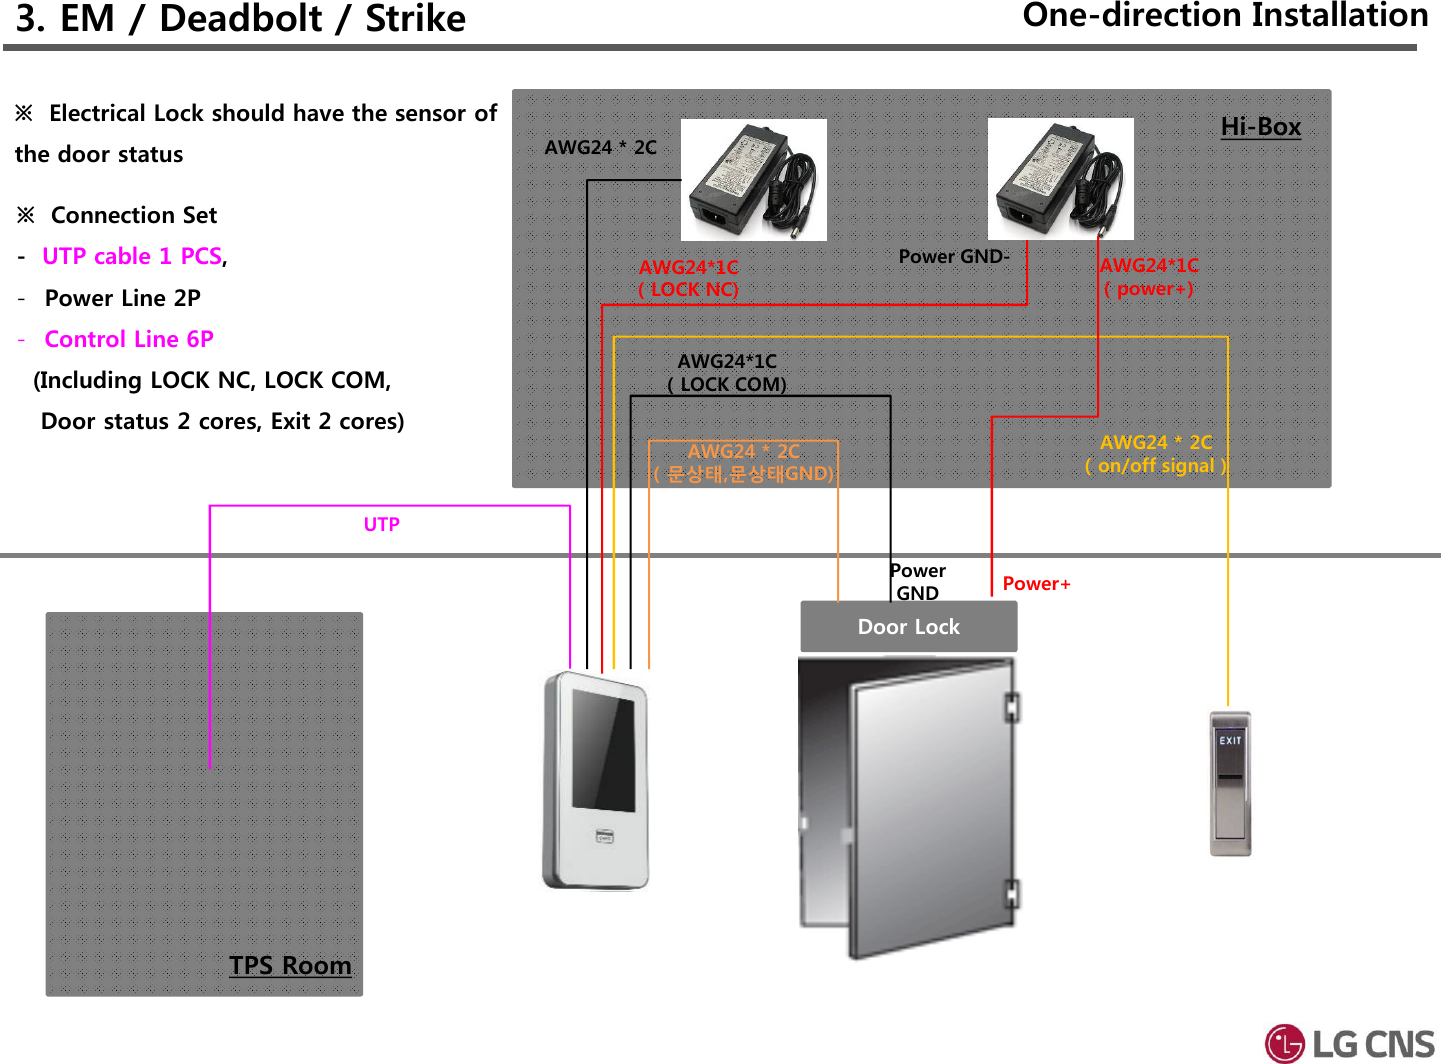 3. EM / Deadbolt / Strike One-direction InstallationDoor LockHi-BoxTPS RoomUTPAWG24*1C( LOCK NC)AWG24 * 2C( 문상태,문상태GND)※  Connection Set-UTP cable 1 PCS,-Power Line 2P -Control Line 6P(Including LOCK NC, LOCK COM, Door status 2 cores, Exit 2 cores)※  Electrical Lock should have the sensor of the door statusAWG24 * 2C( on/off signal )AWG24 * 2CAWG24*1C( LOCK COM)AWG24*1C( power+)Power+PowerGNDPower GND-